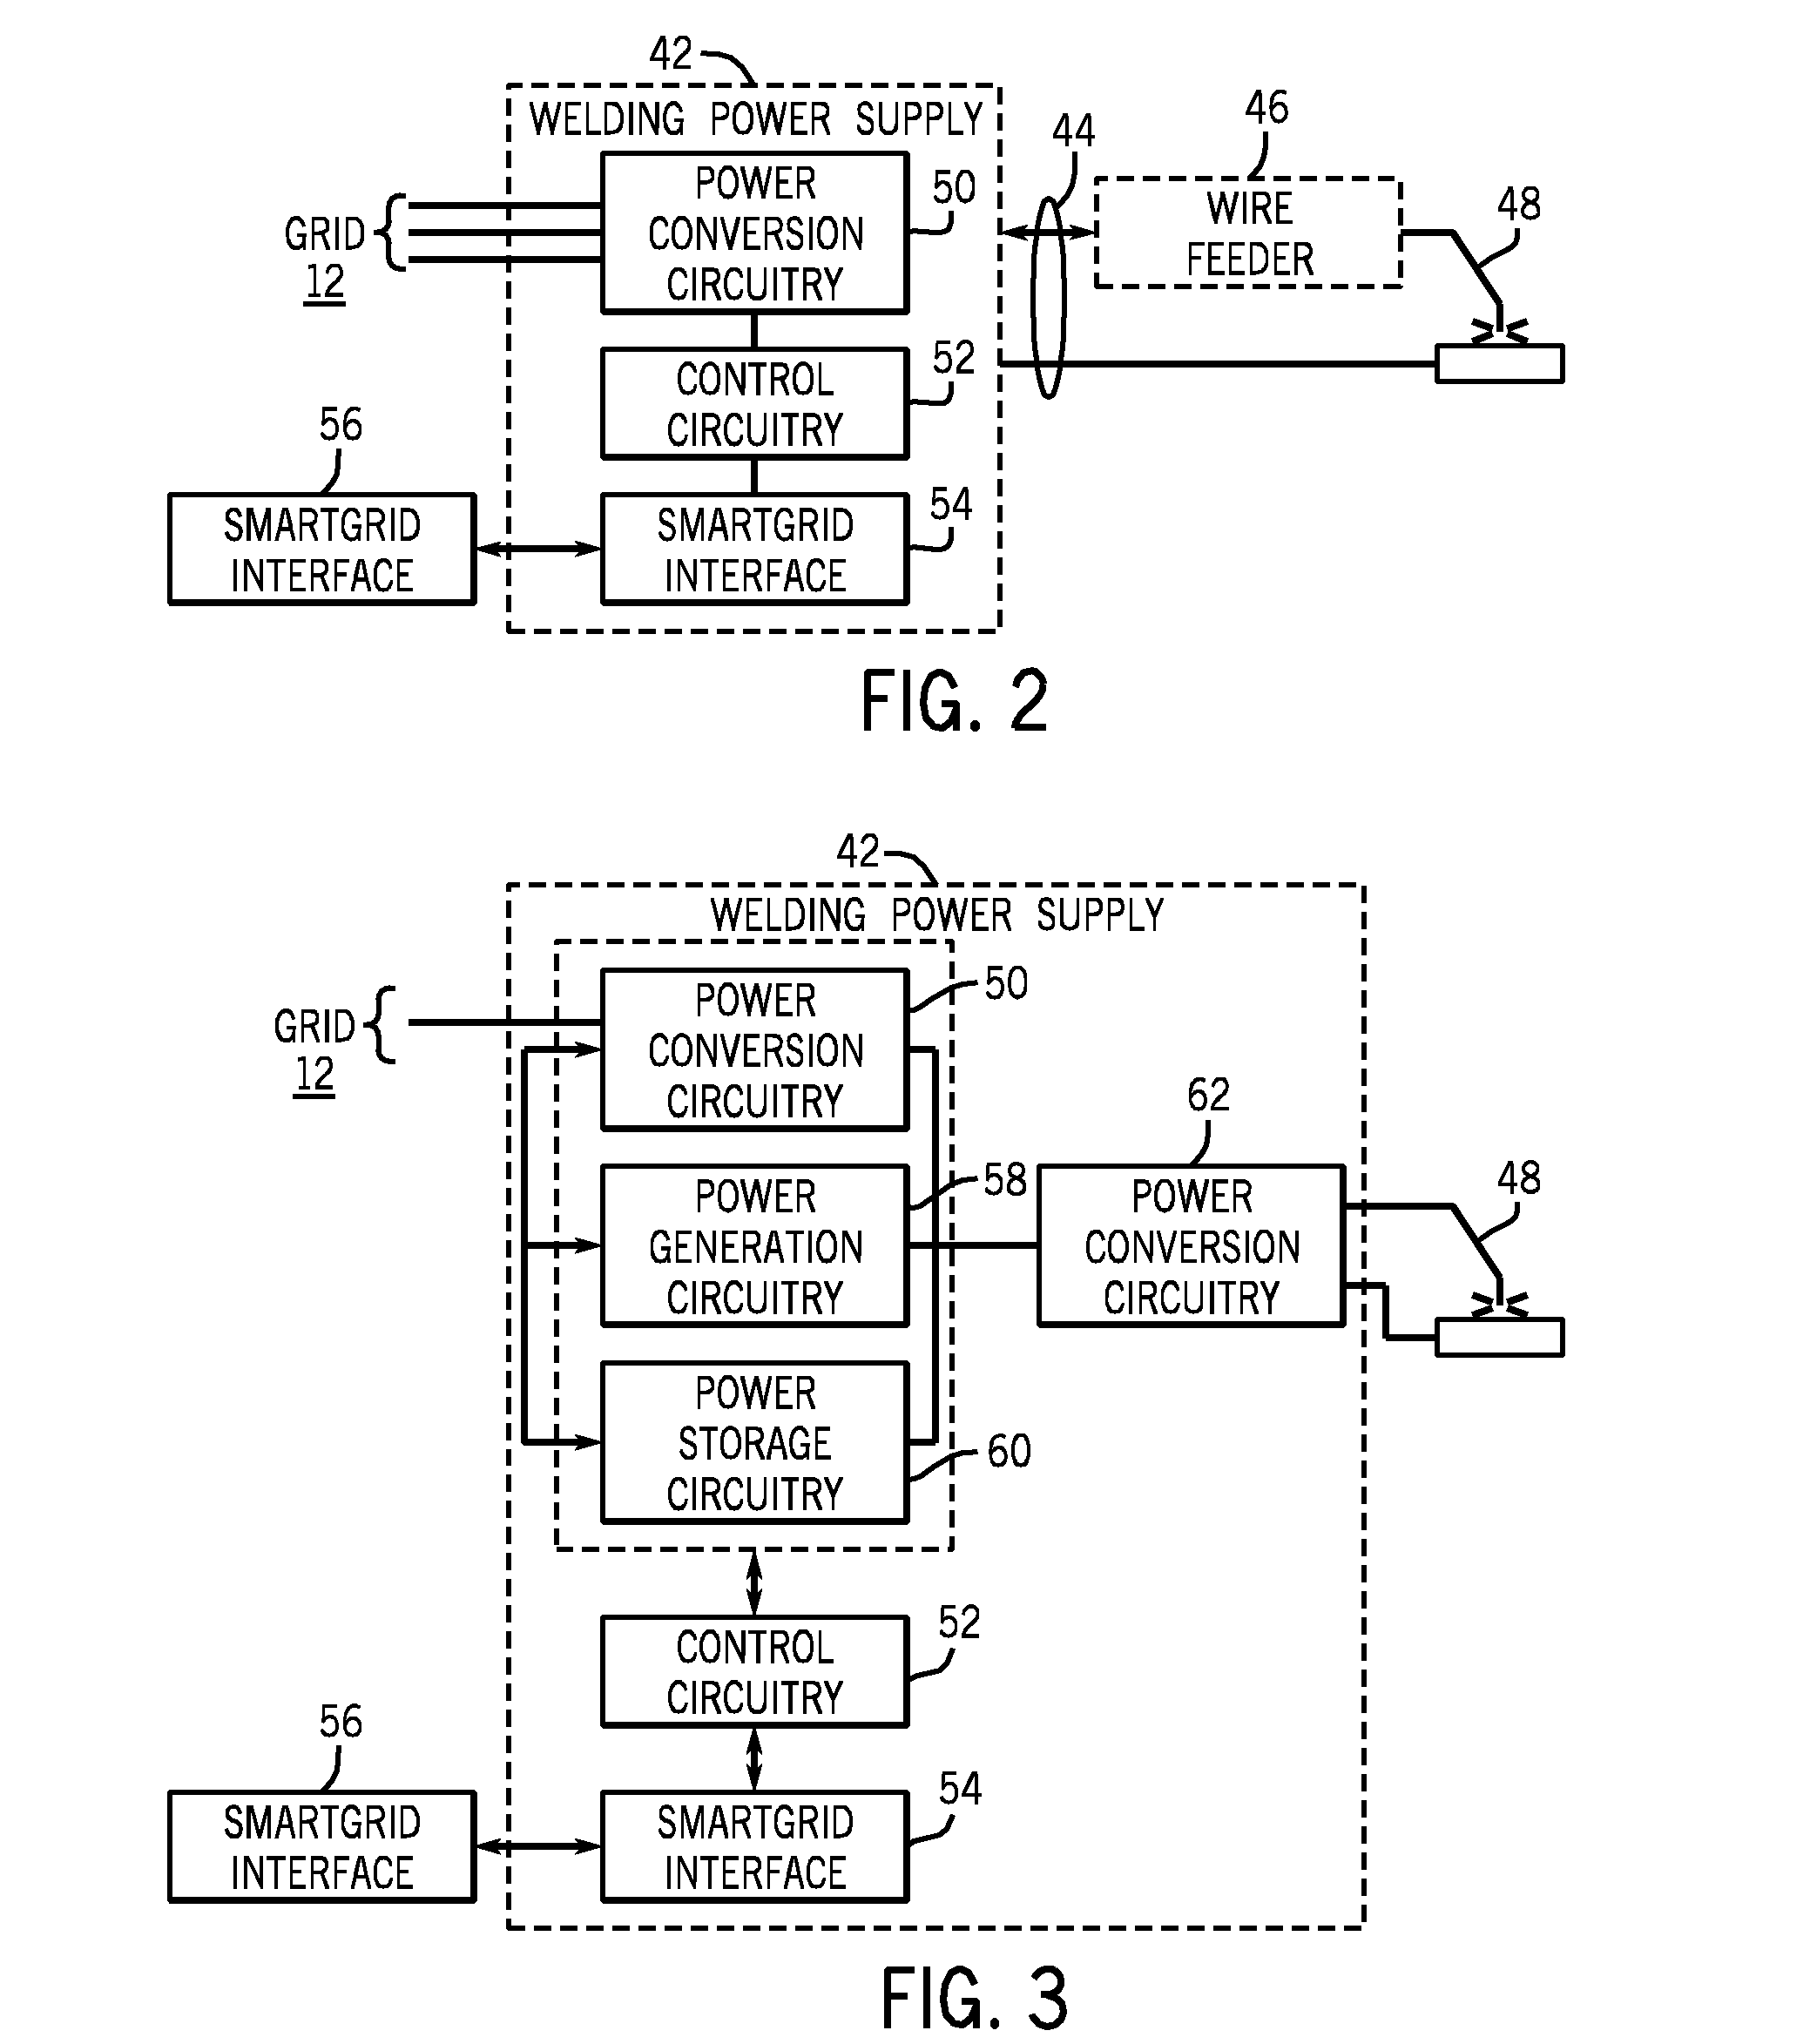 Welding system having a power grid interface